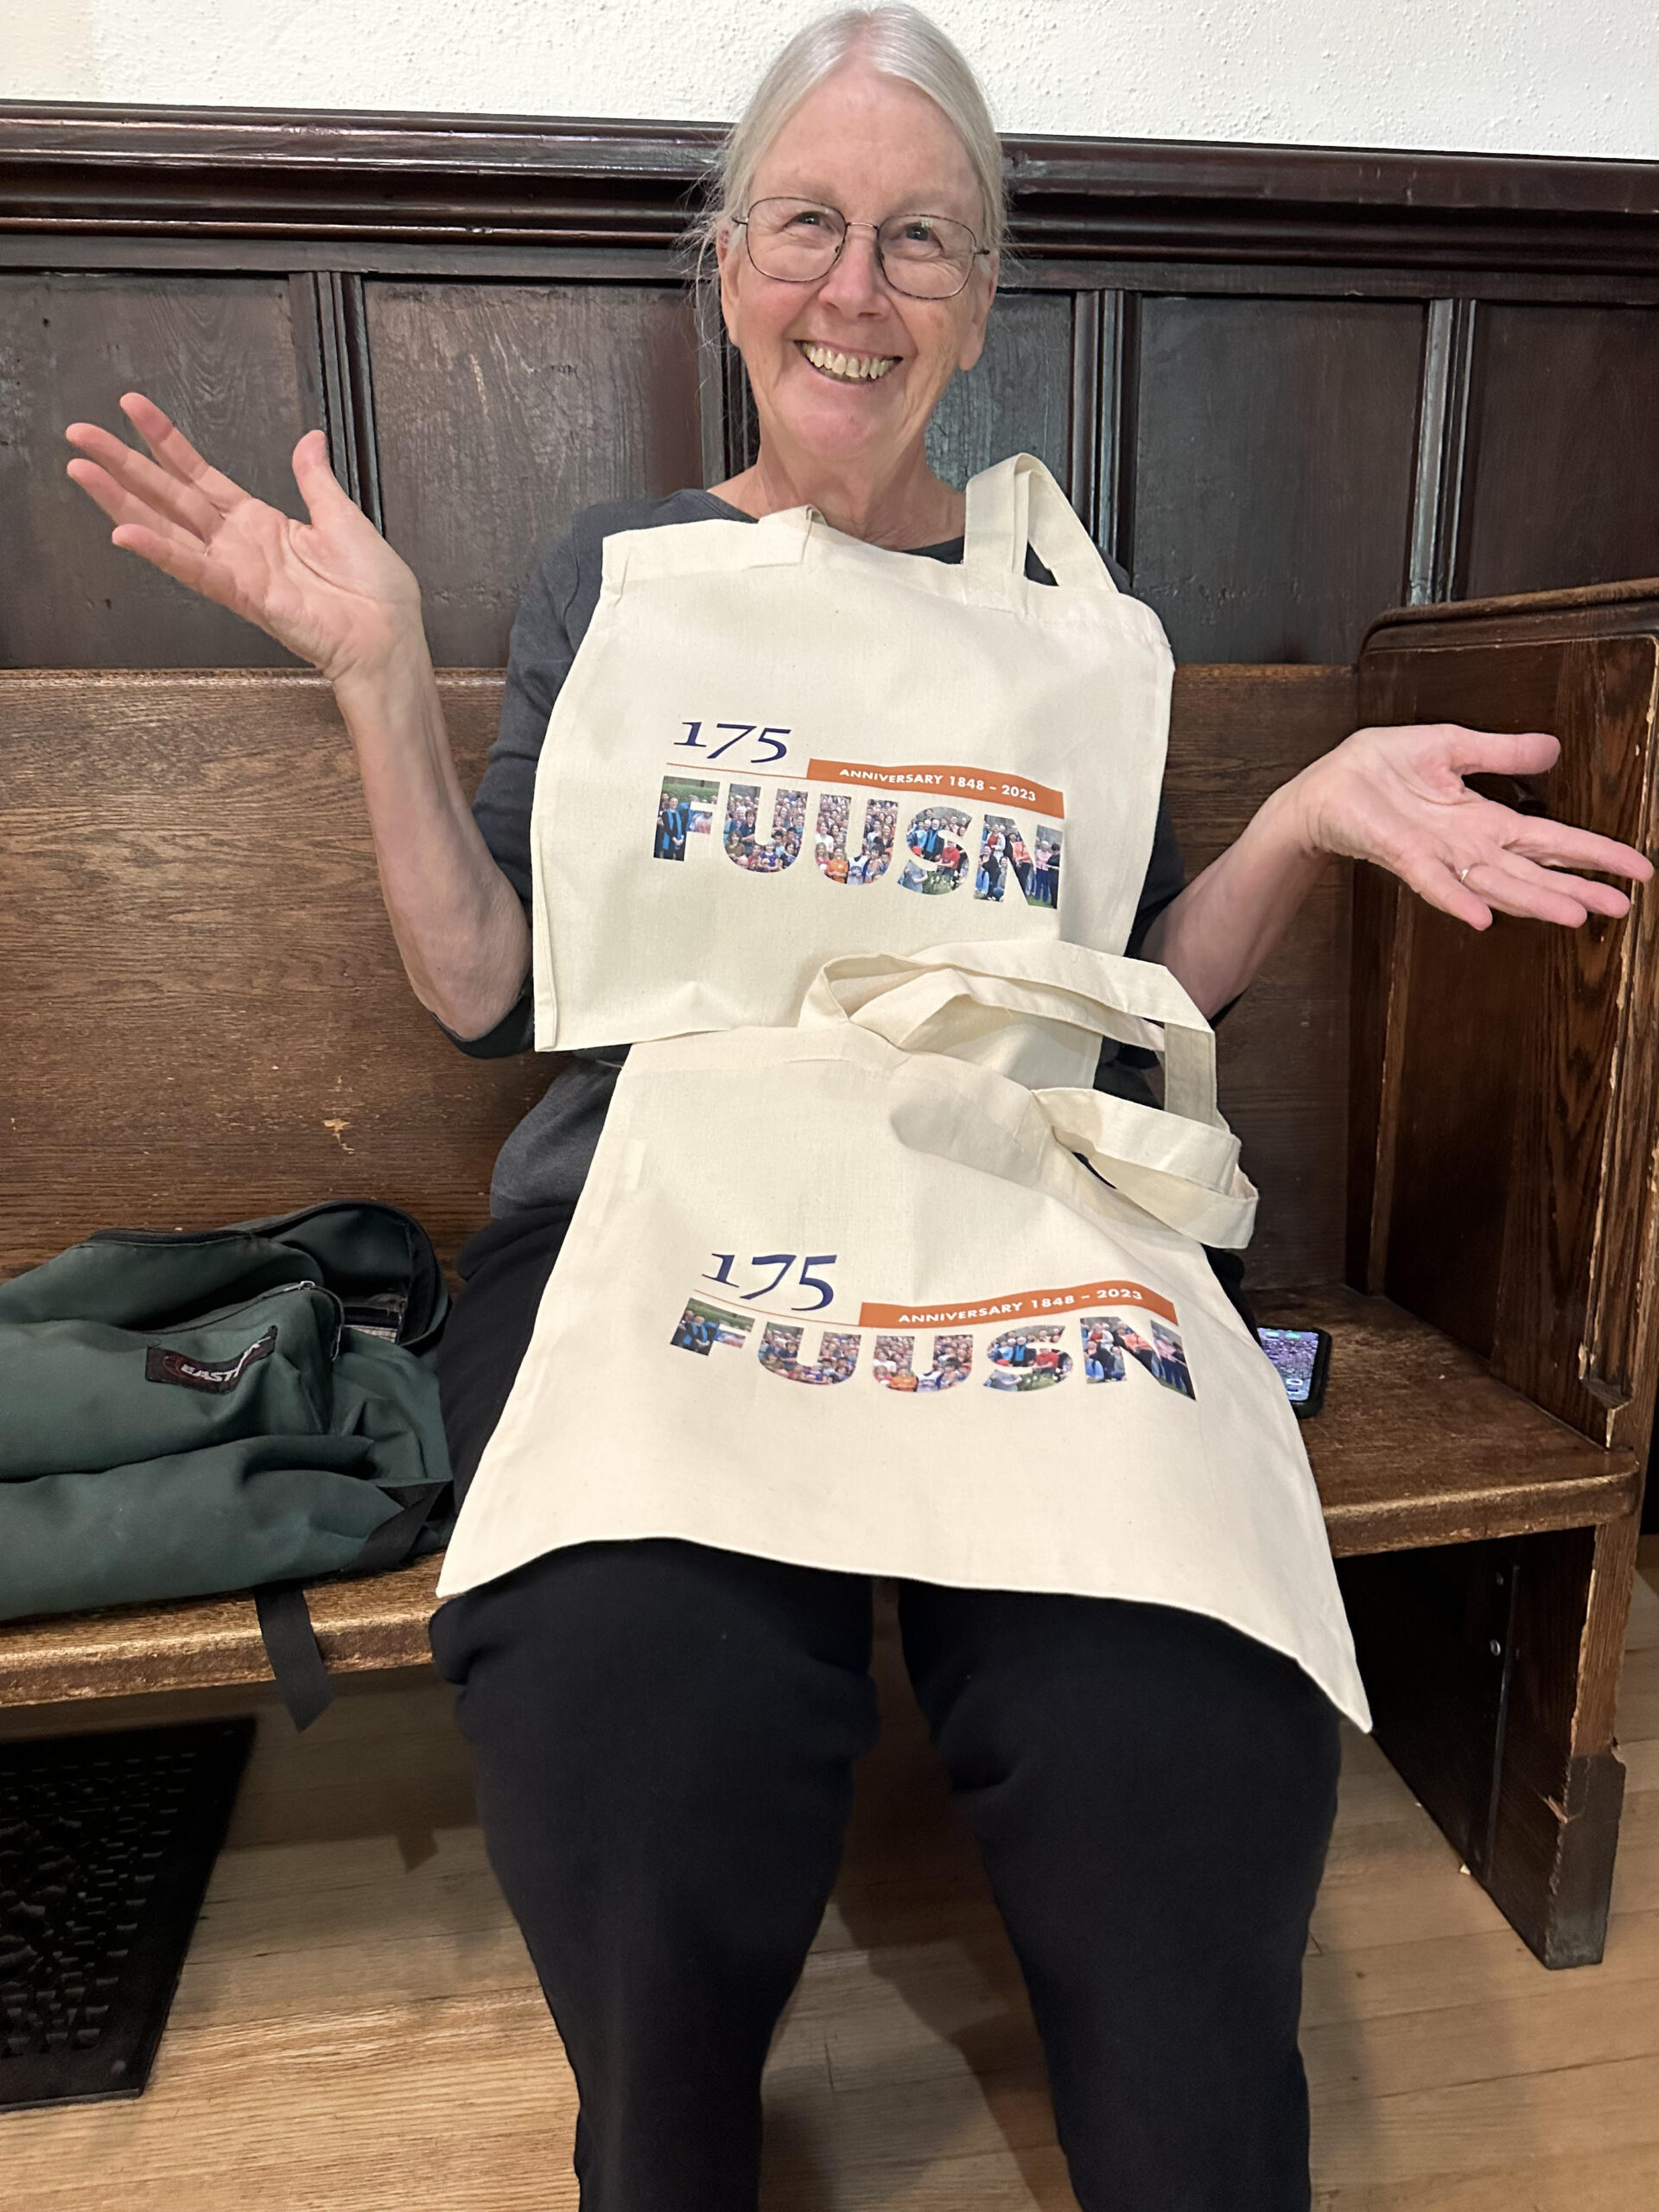 A woman with short gray hair and glasses seated on a church pew is blanketed with two 175th Anniversary tote bags.